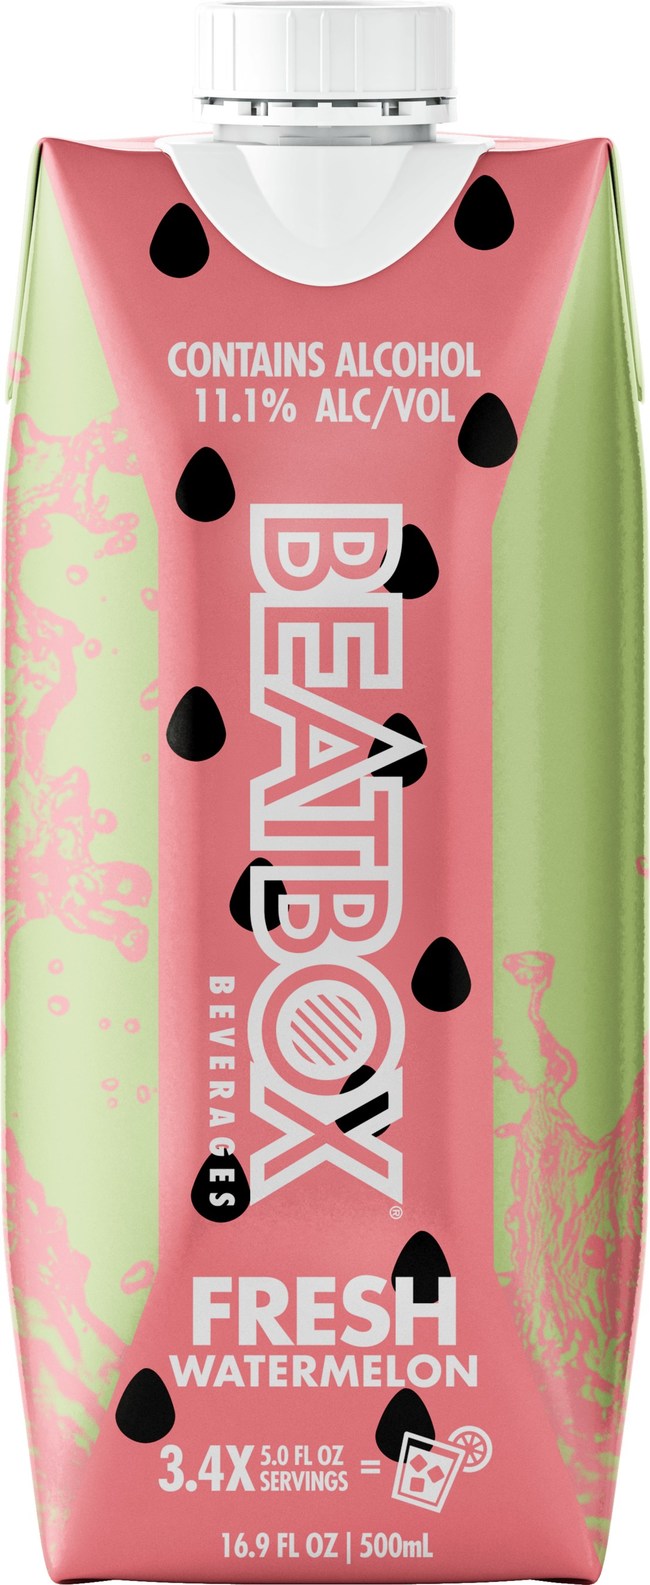 Beatbox Beverages Adds Fresh Watermelon To Its Party Punch Range